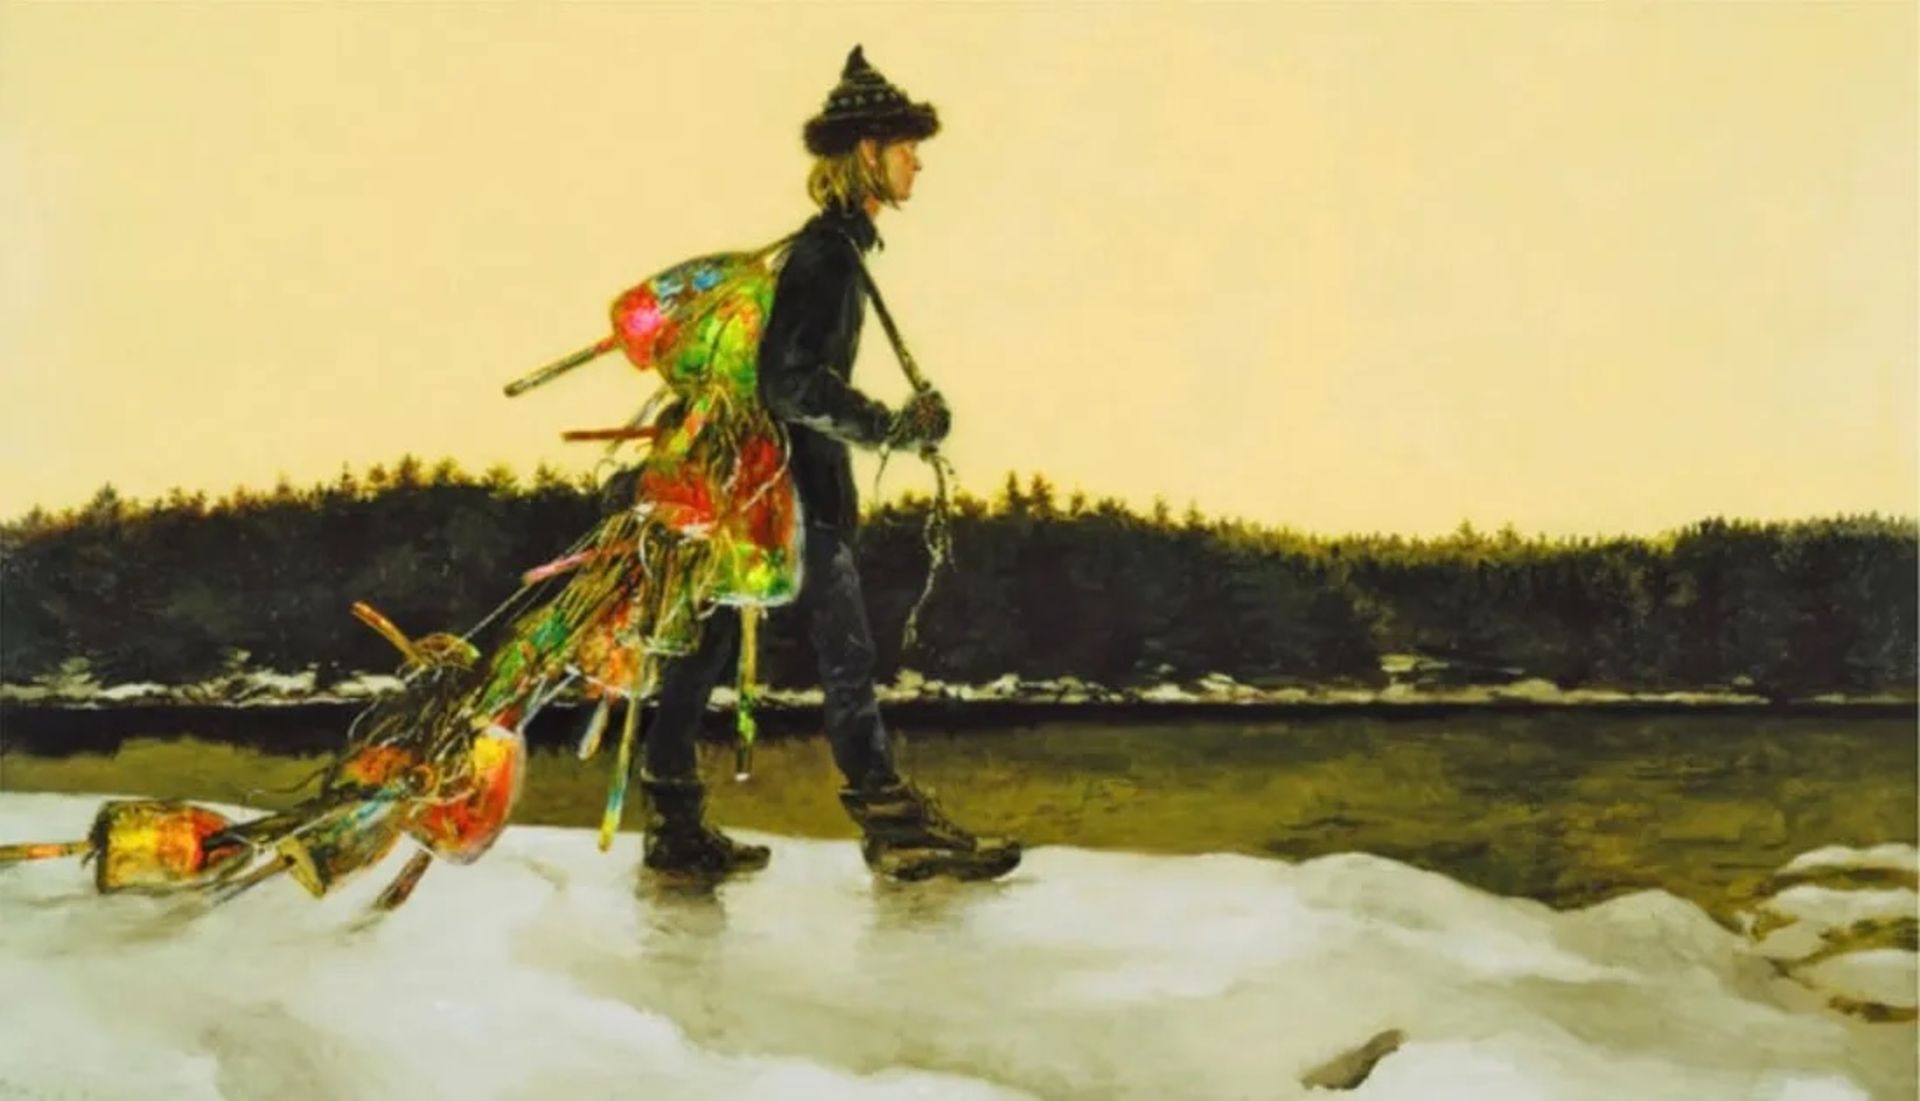 Jamie Wyeth "The Mainland, 1992" Offset Lithograph